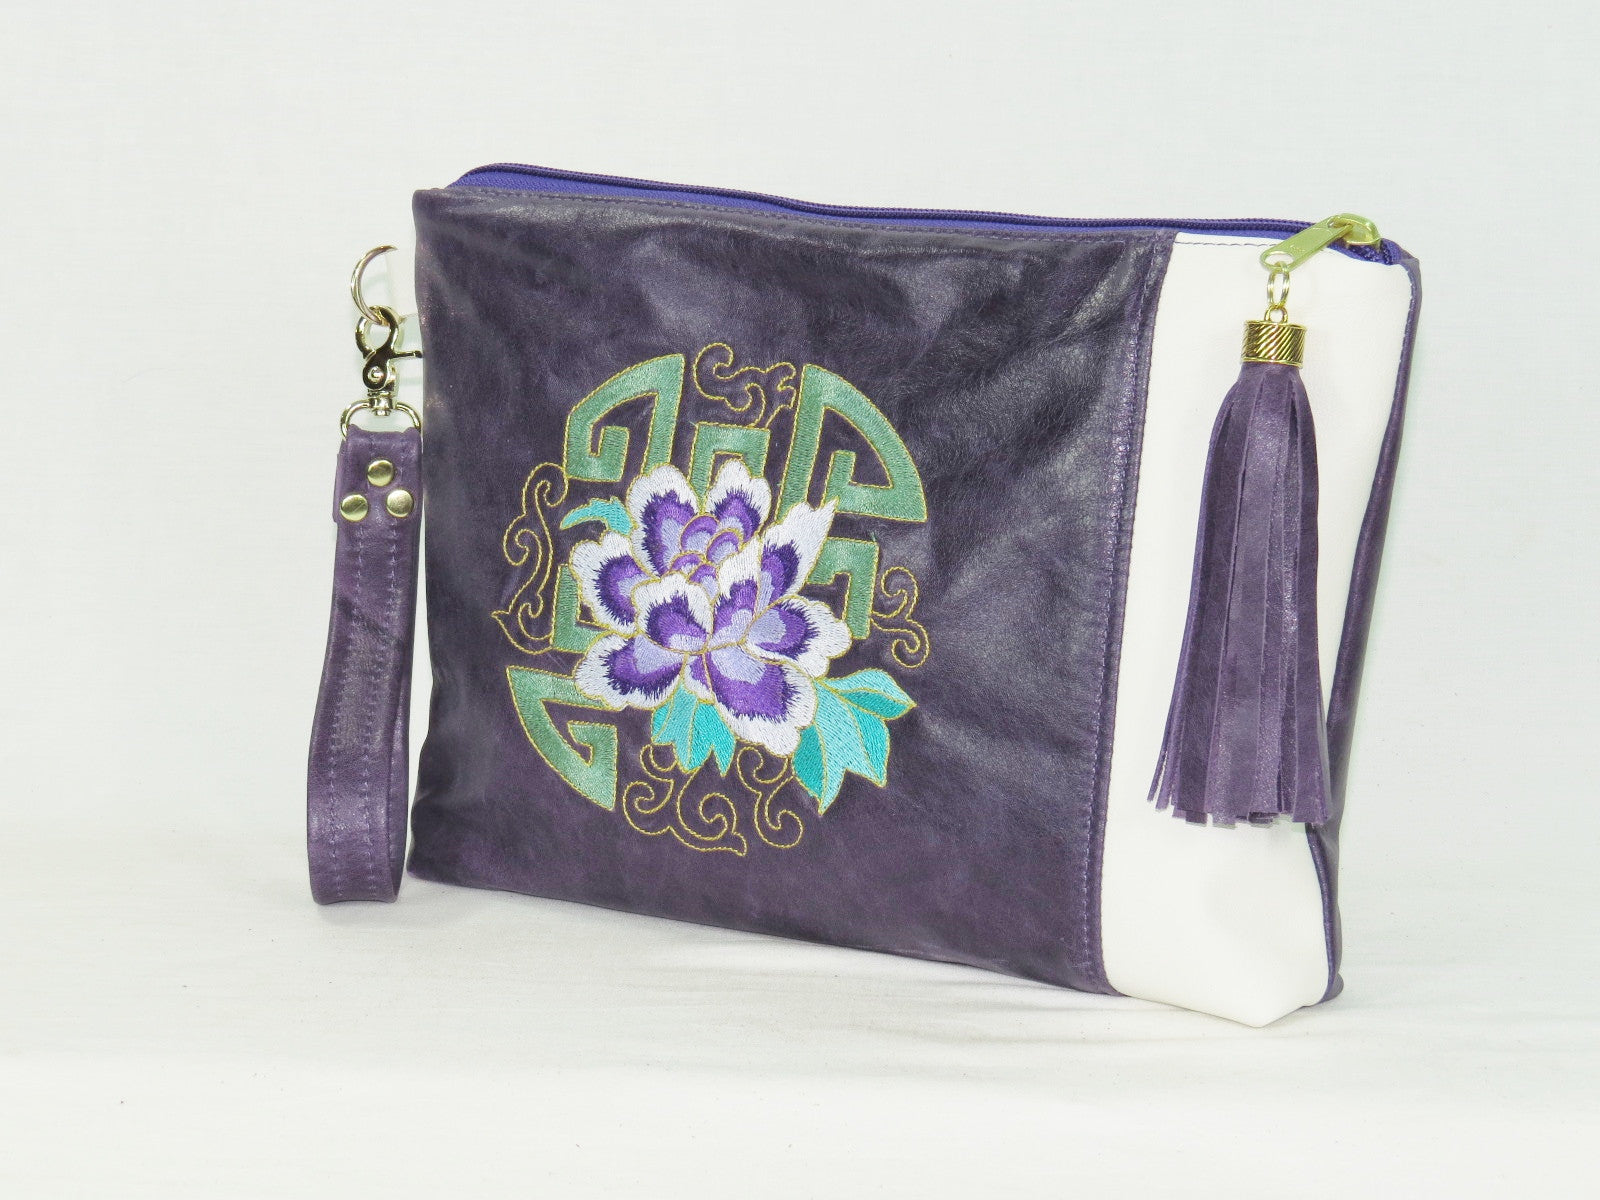 Amethyst and White Leather Zipper Clutch China Block Embroidery angle view